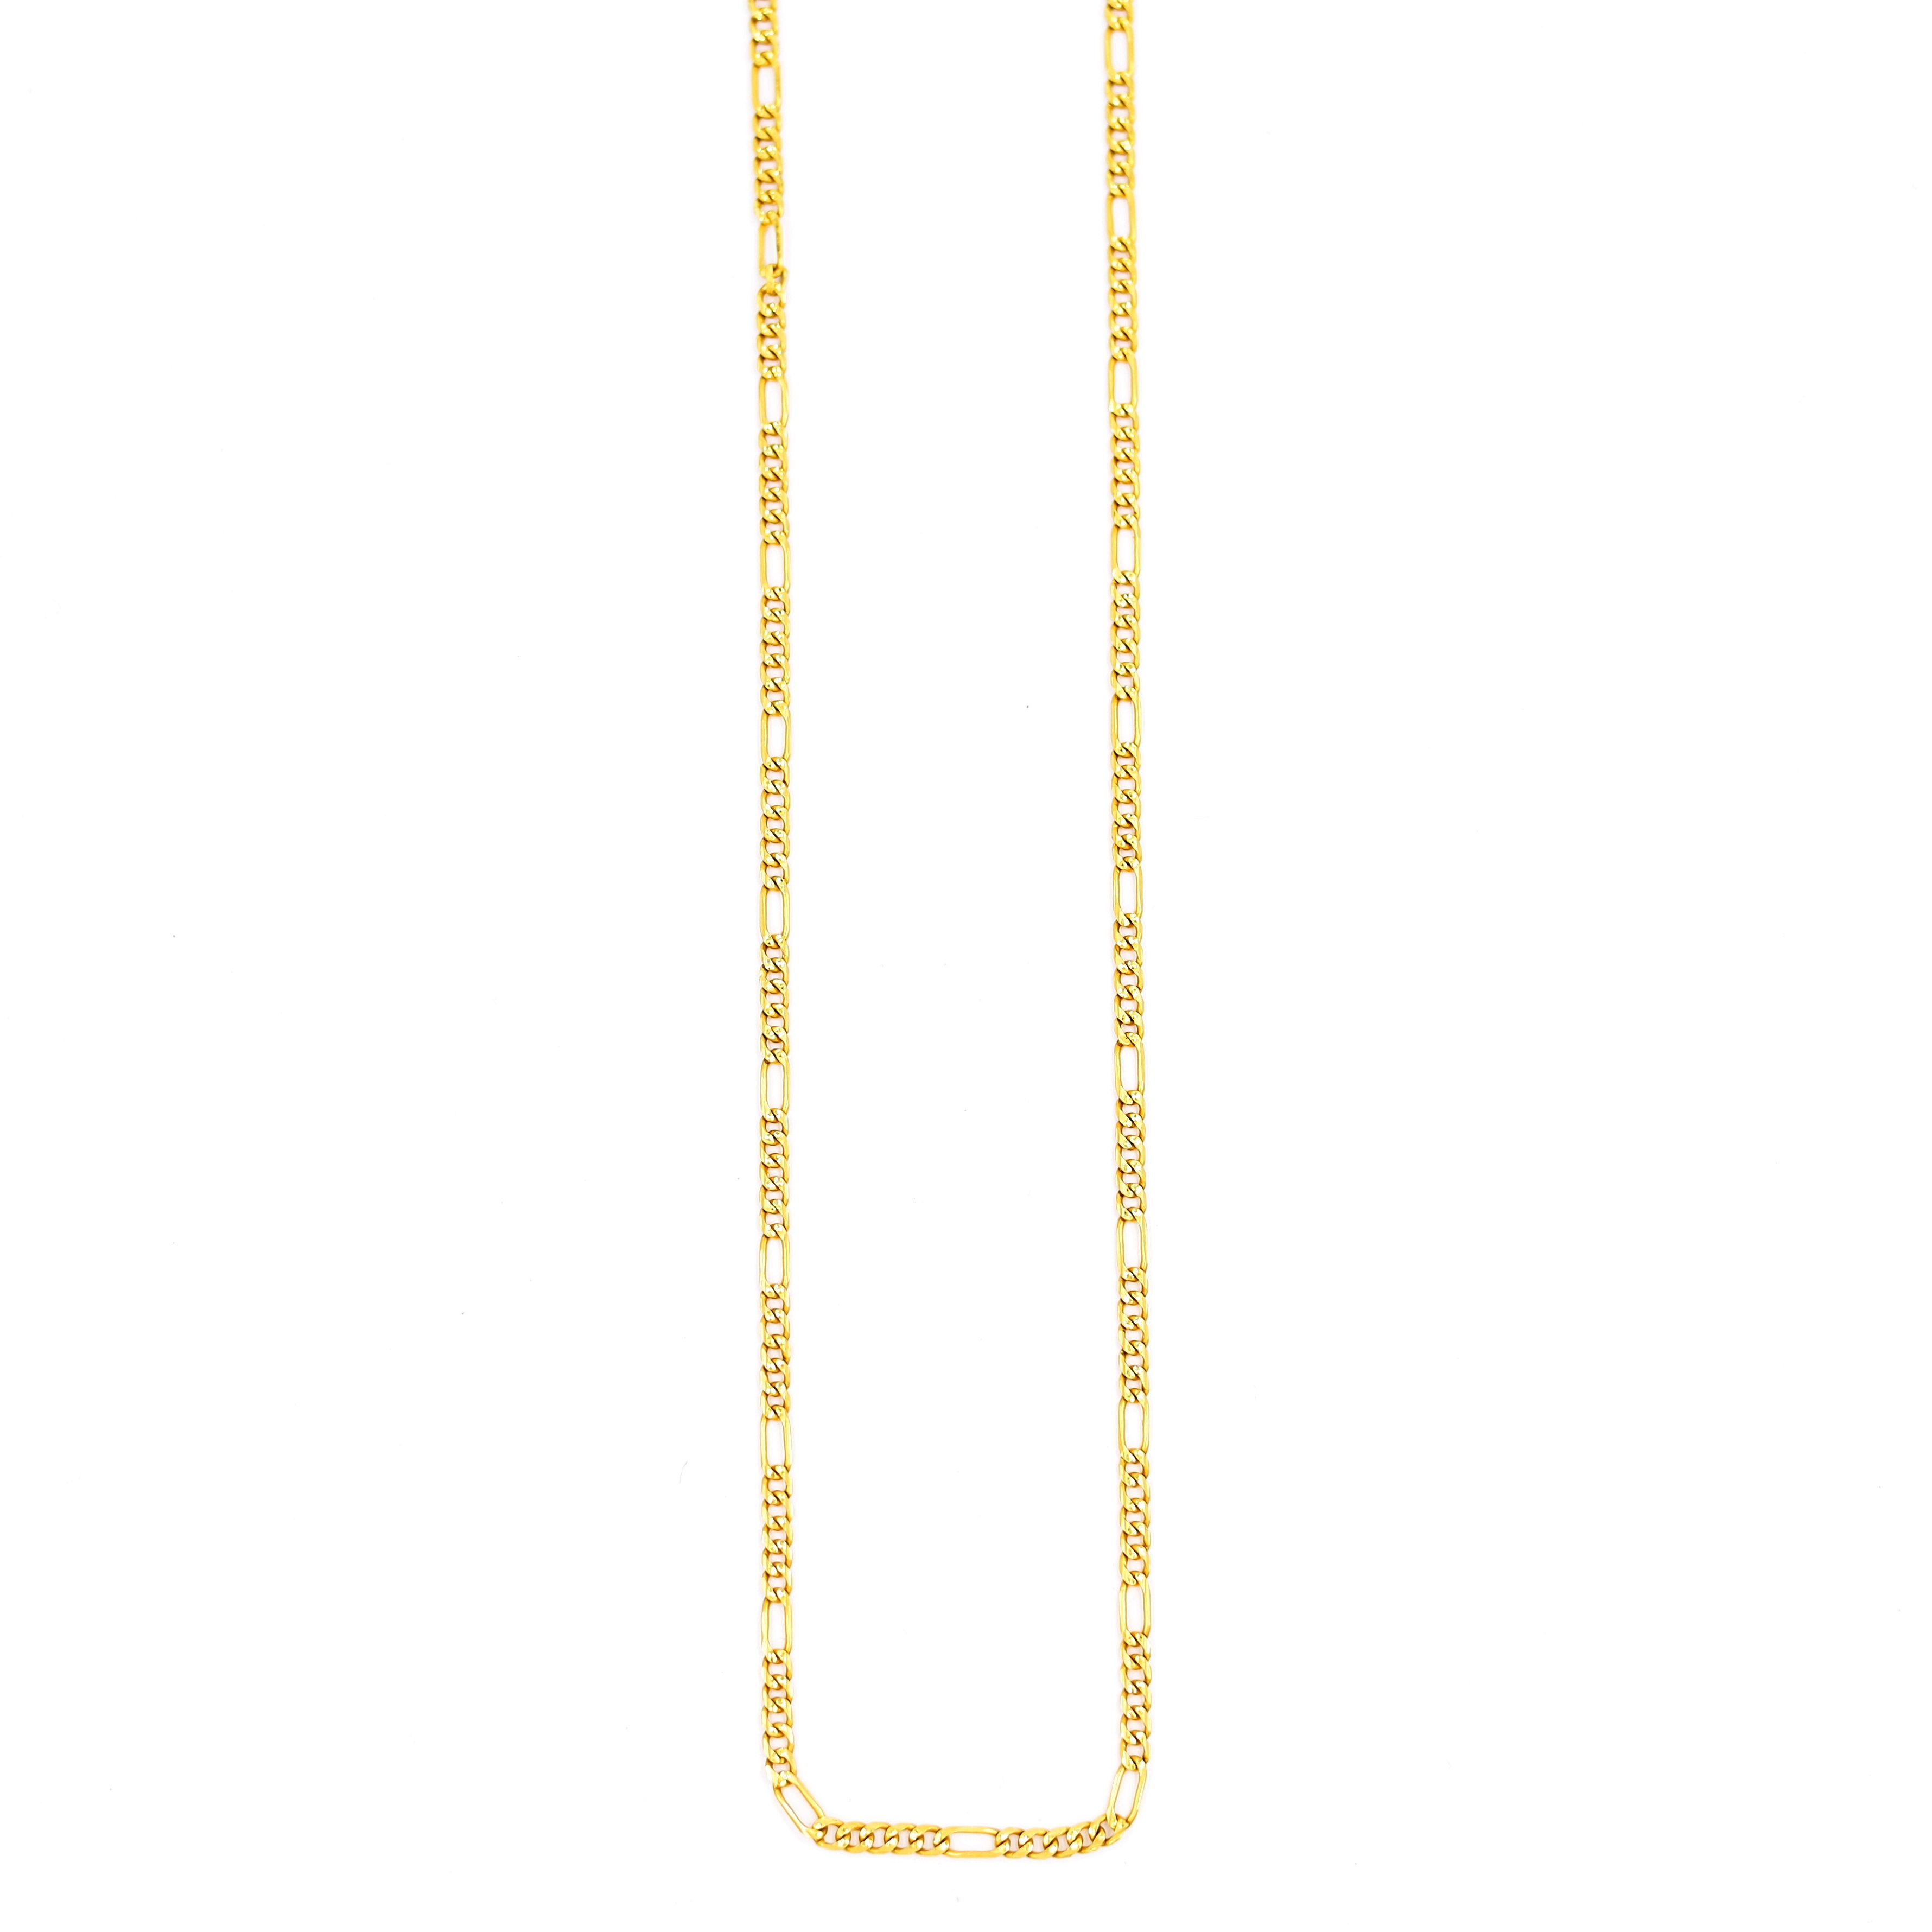 Minimal Gold Chain With Links For Men